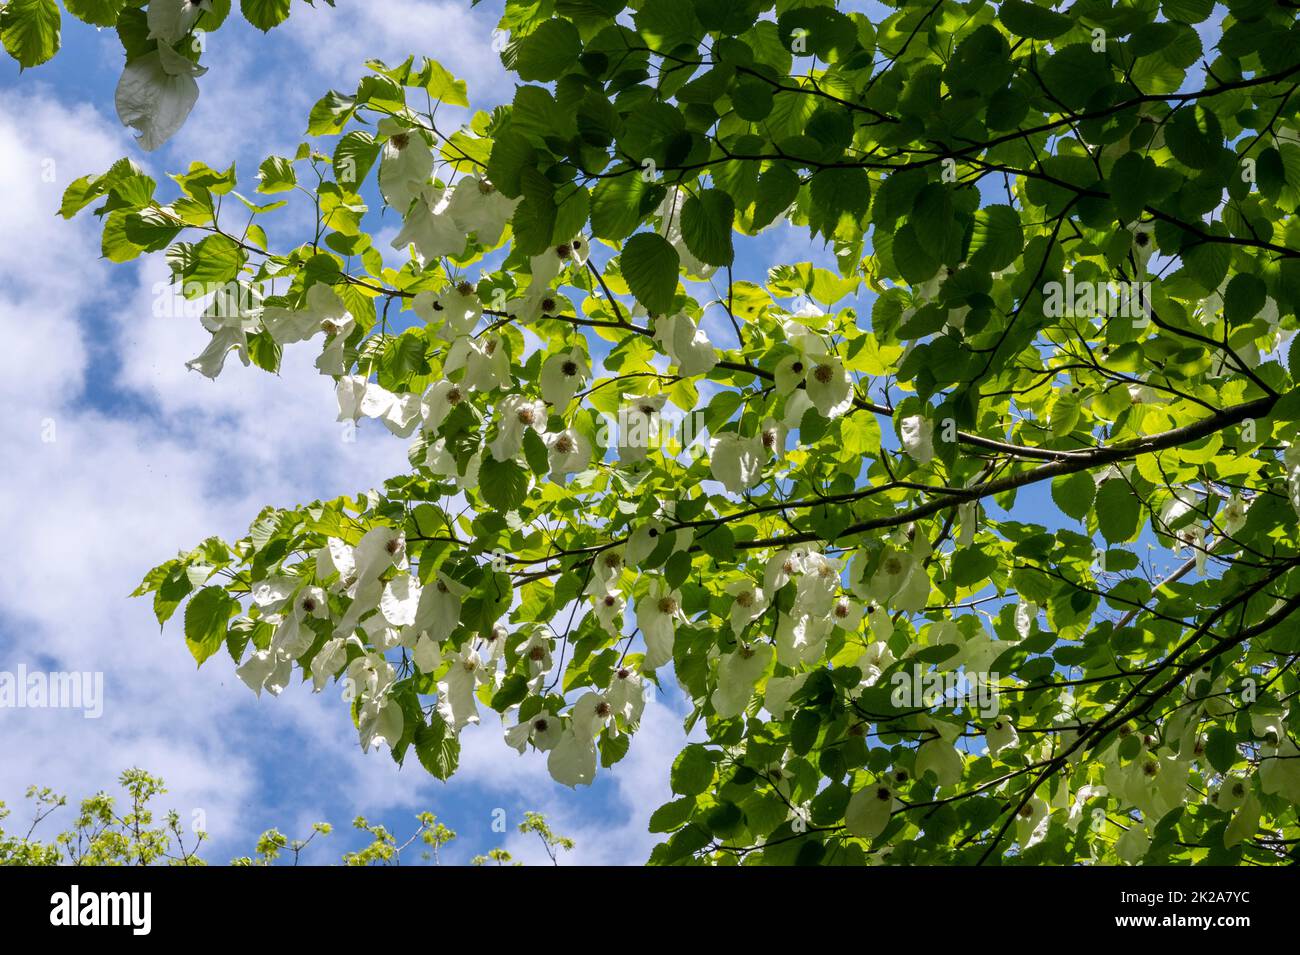 The handkerchief tree (Davidia involucrata) with flowers enclosed by white bracts. Stock Photo